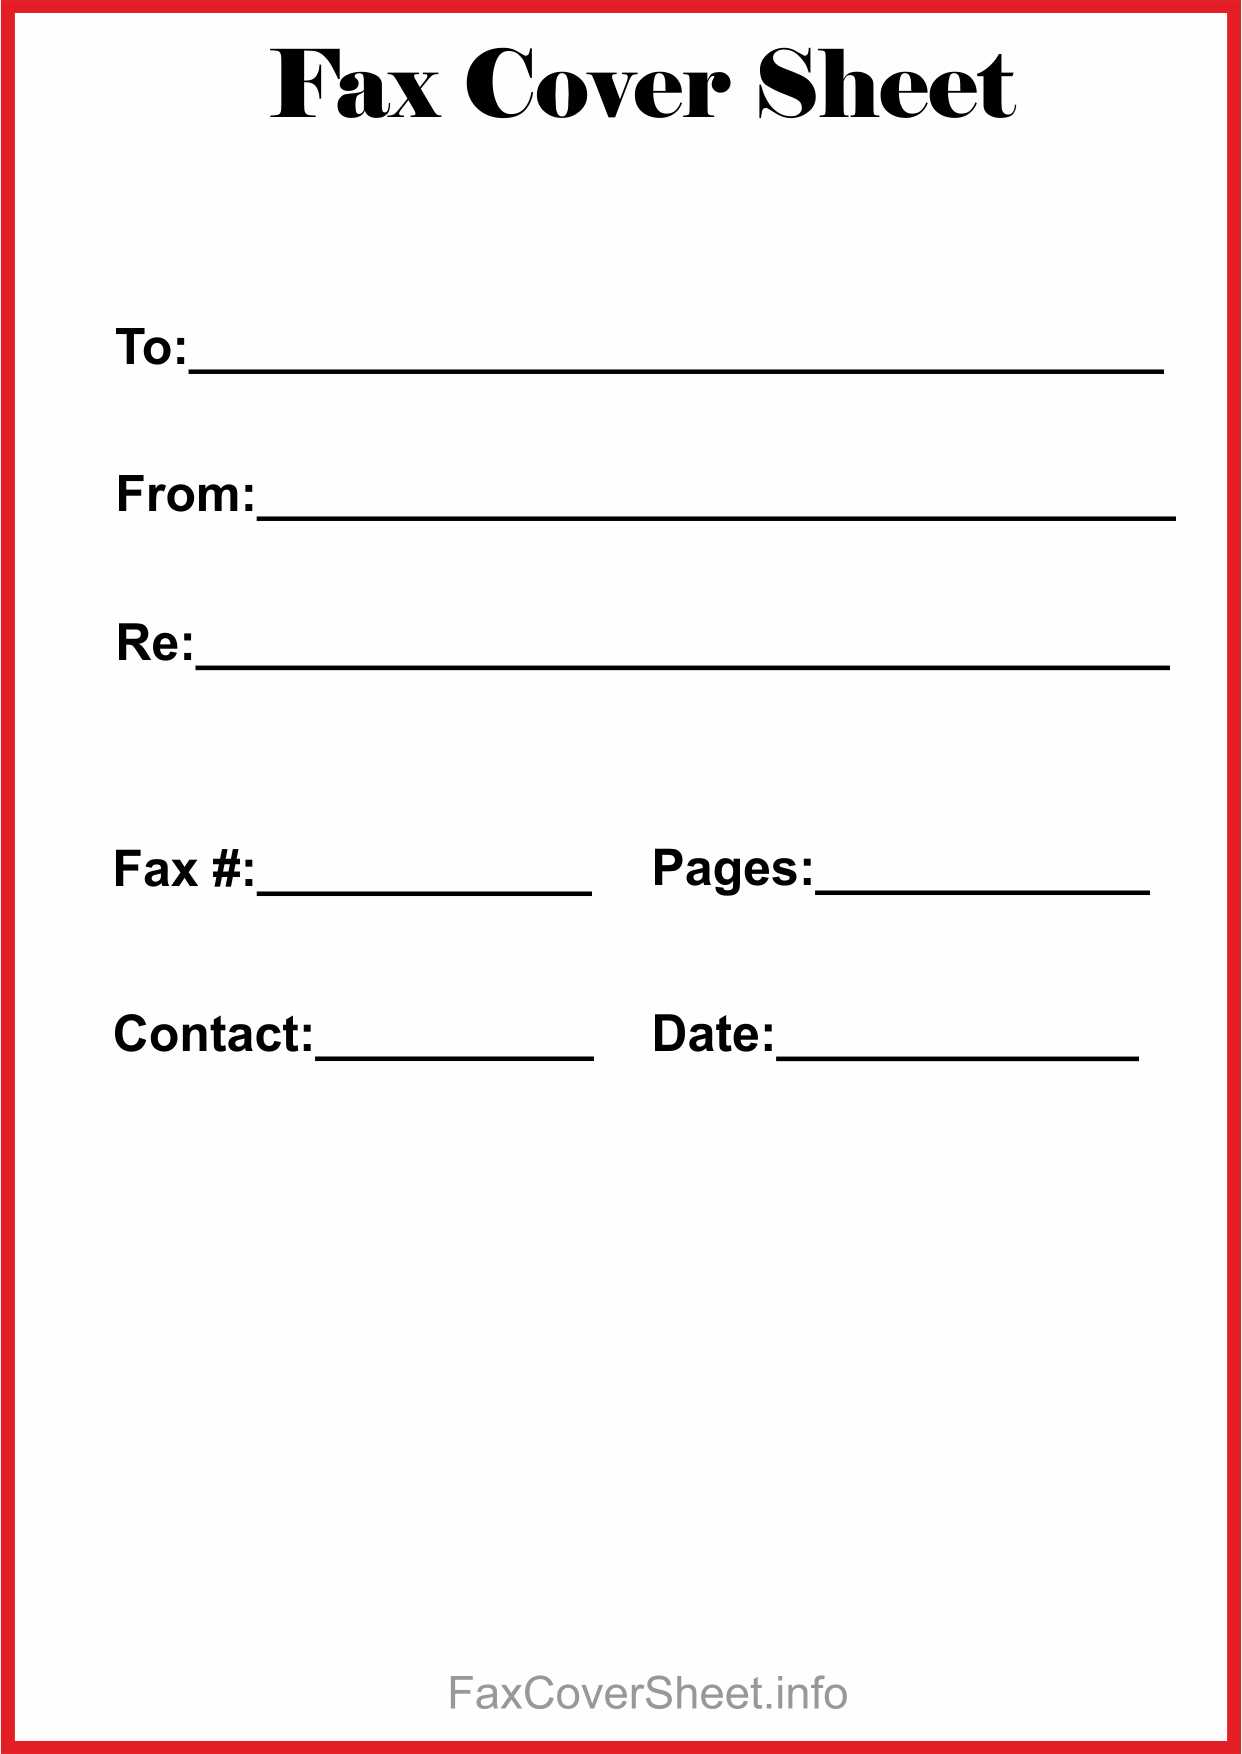 How To Find Blank Fax Cover Sheet Within Microsoft Word Intended For Fax Cover Sheet Template Word 2010